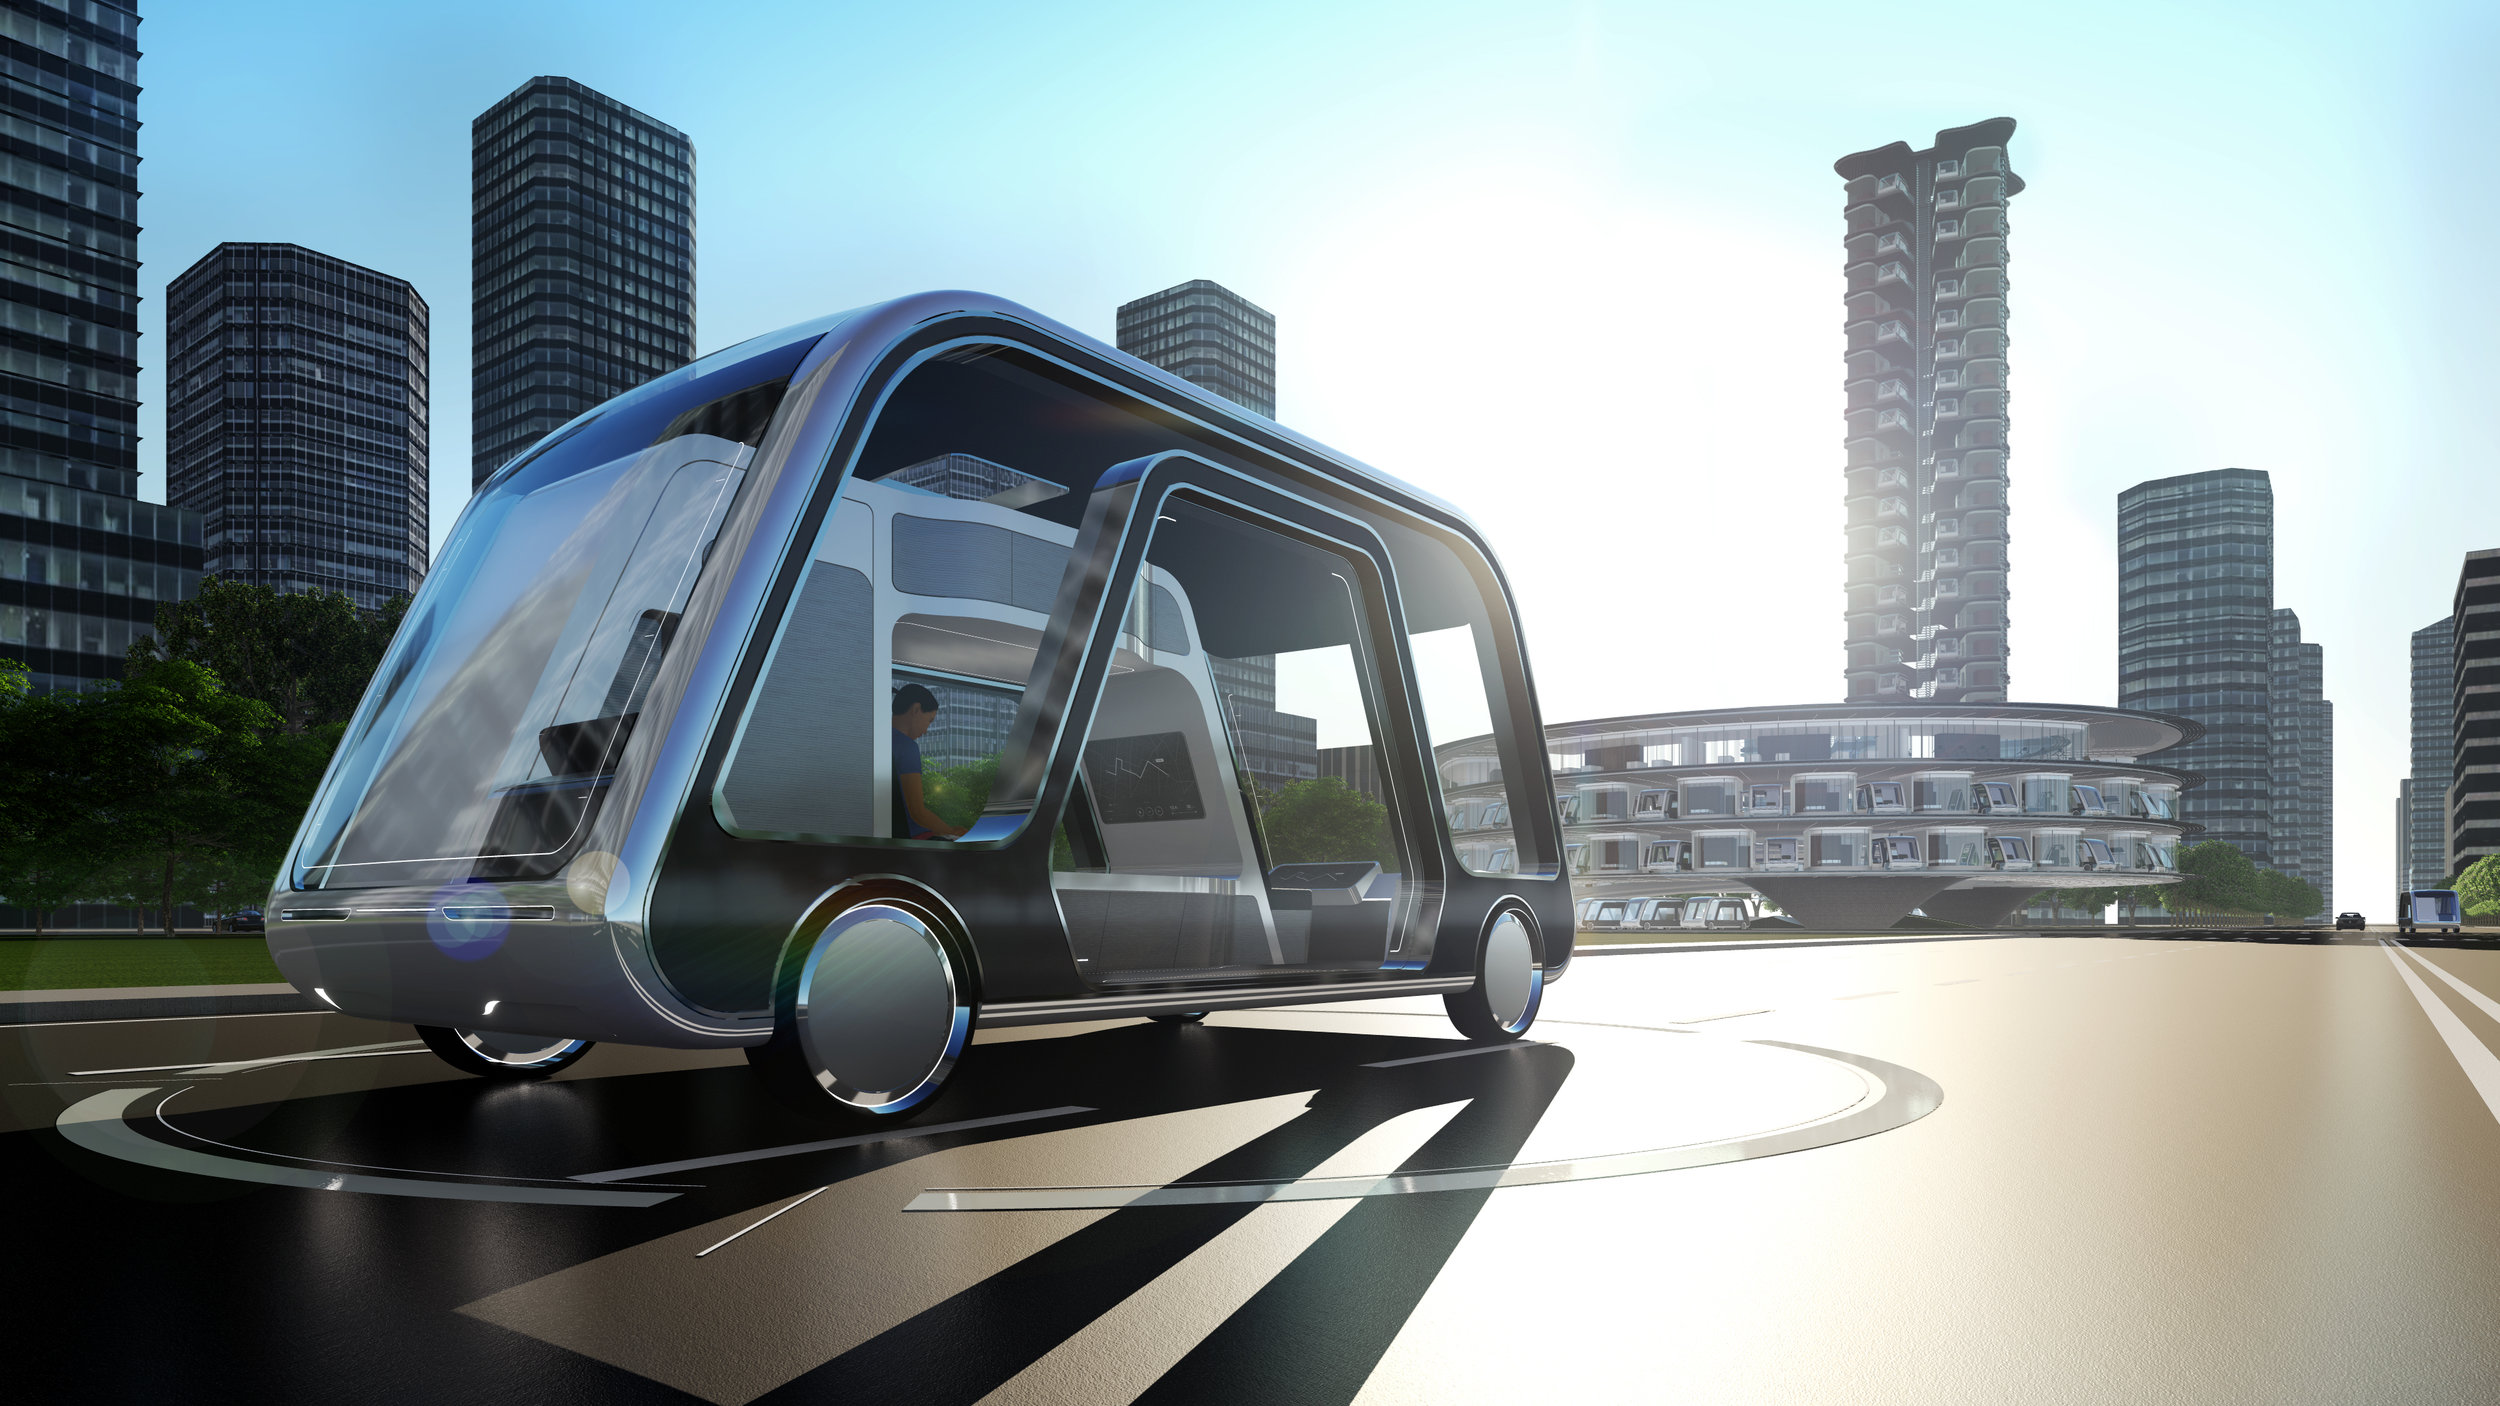 Self-driving hotel rooms are on the way